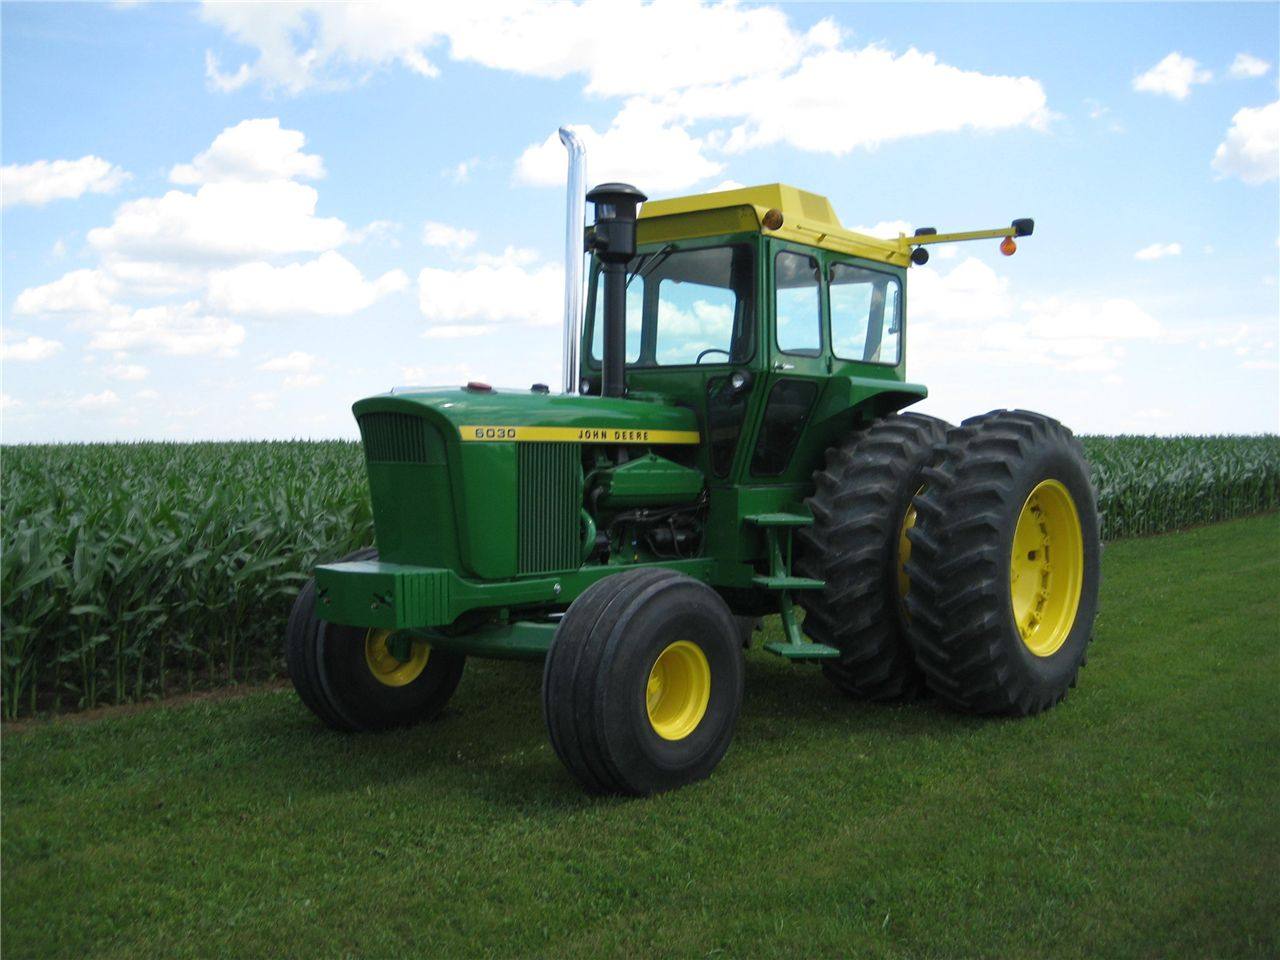 john deere 6030 - tractor & construction plant wiki - the